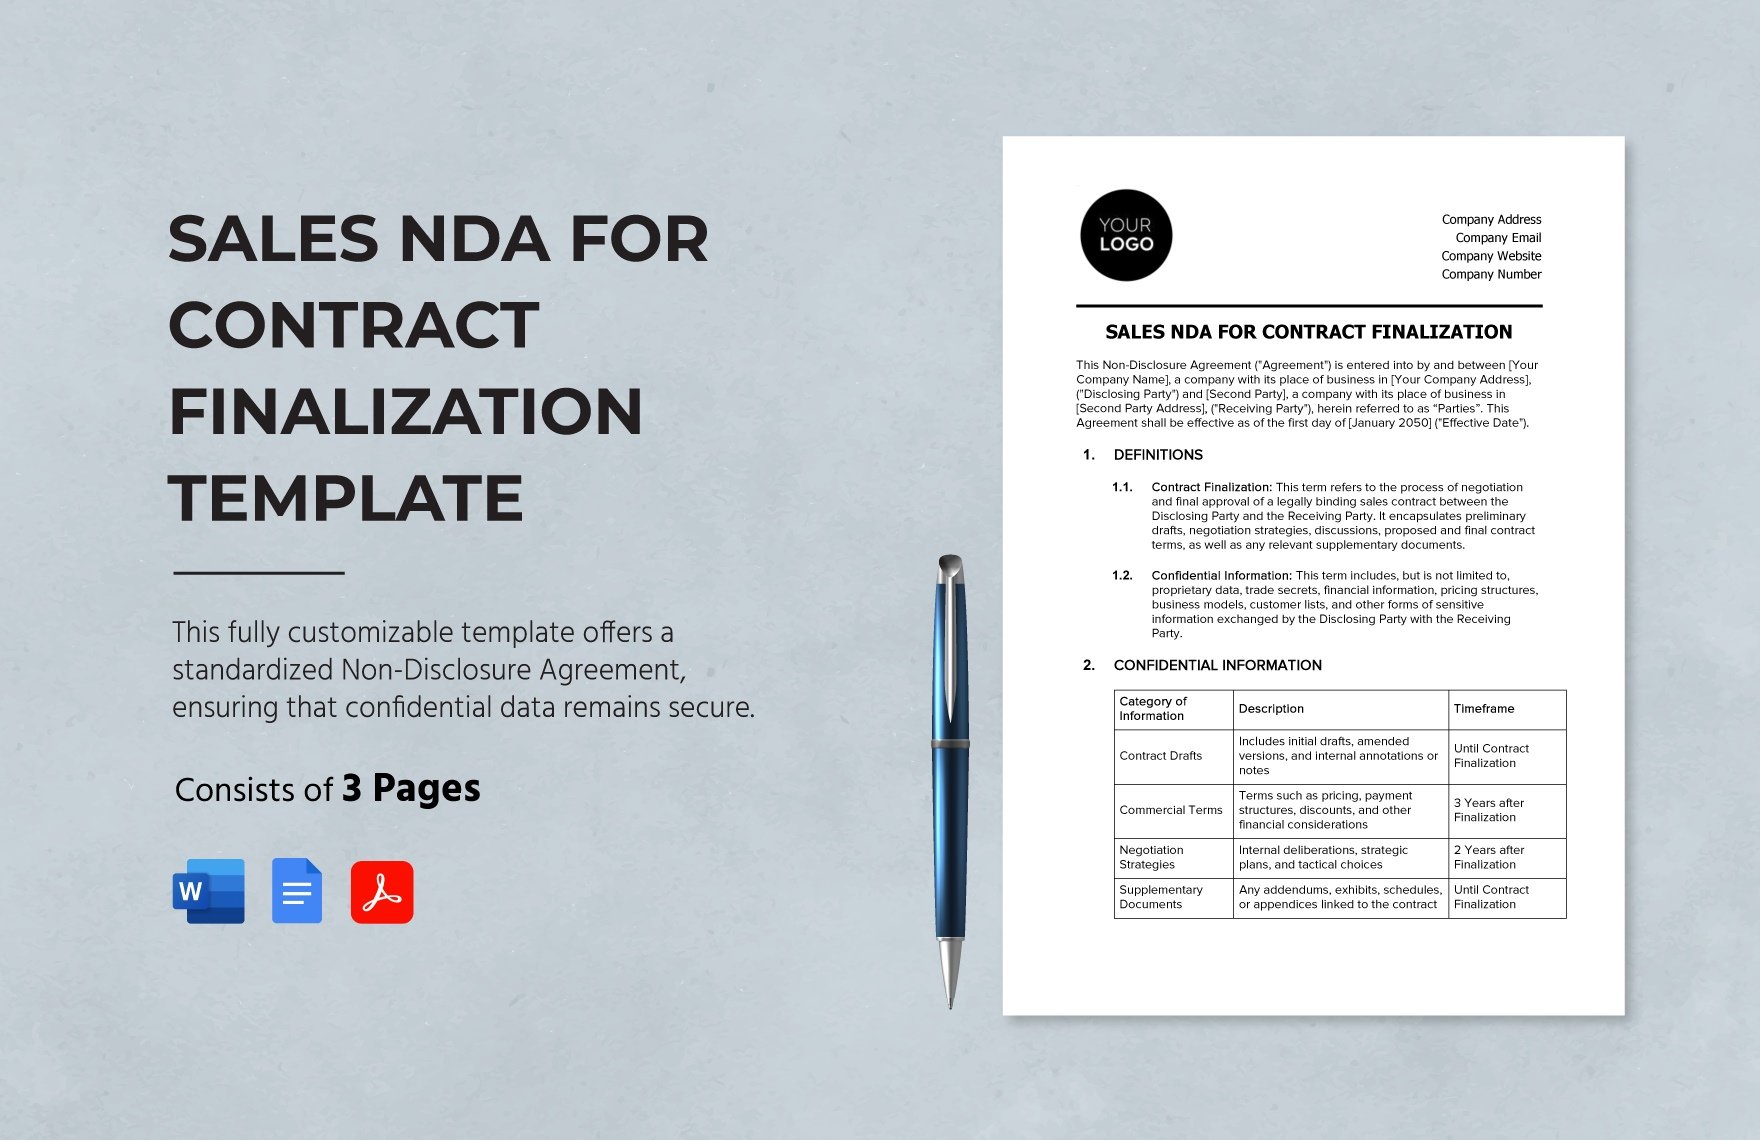 Sales NDA for Contract Finalization Template in Word, Google Docs, PDF